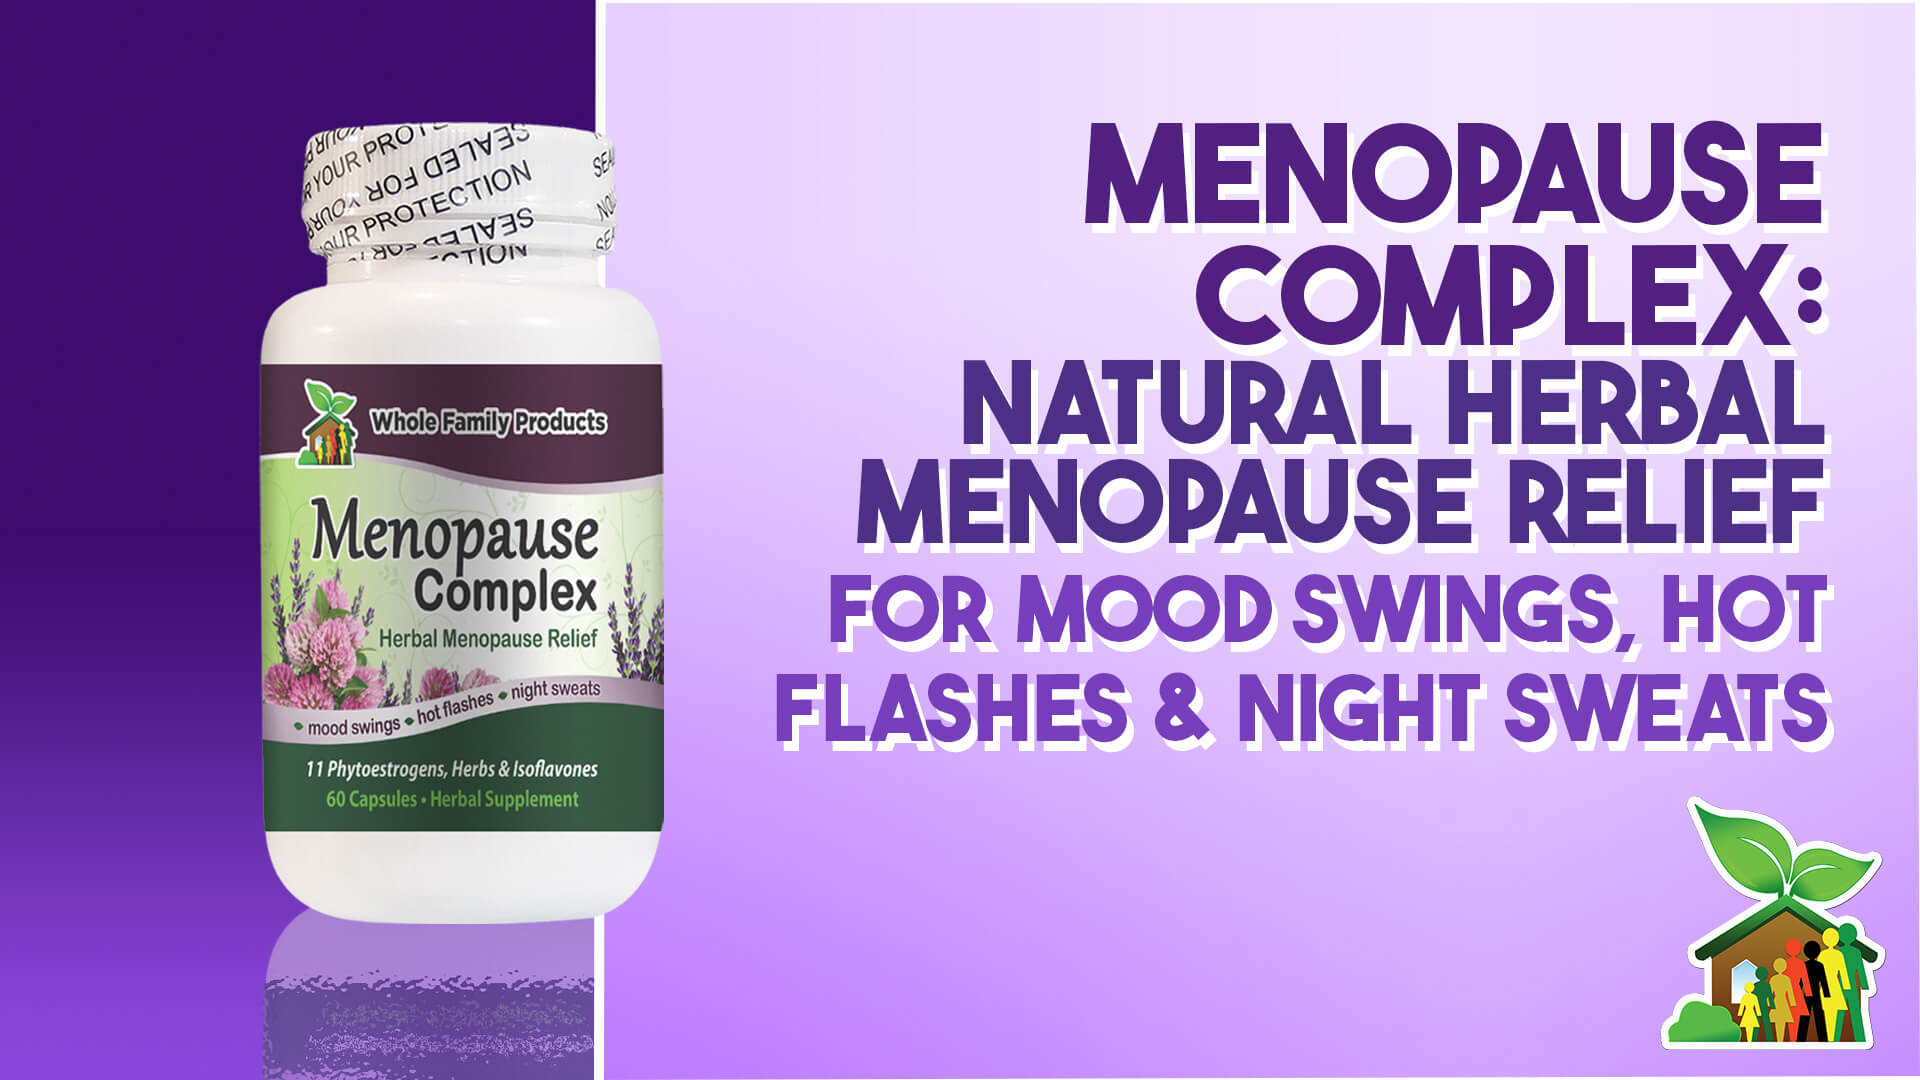 Menopause Complex: Natural Herbal Menopause Relief For Mood Swings, Hot Flashes & Night Sweats